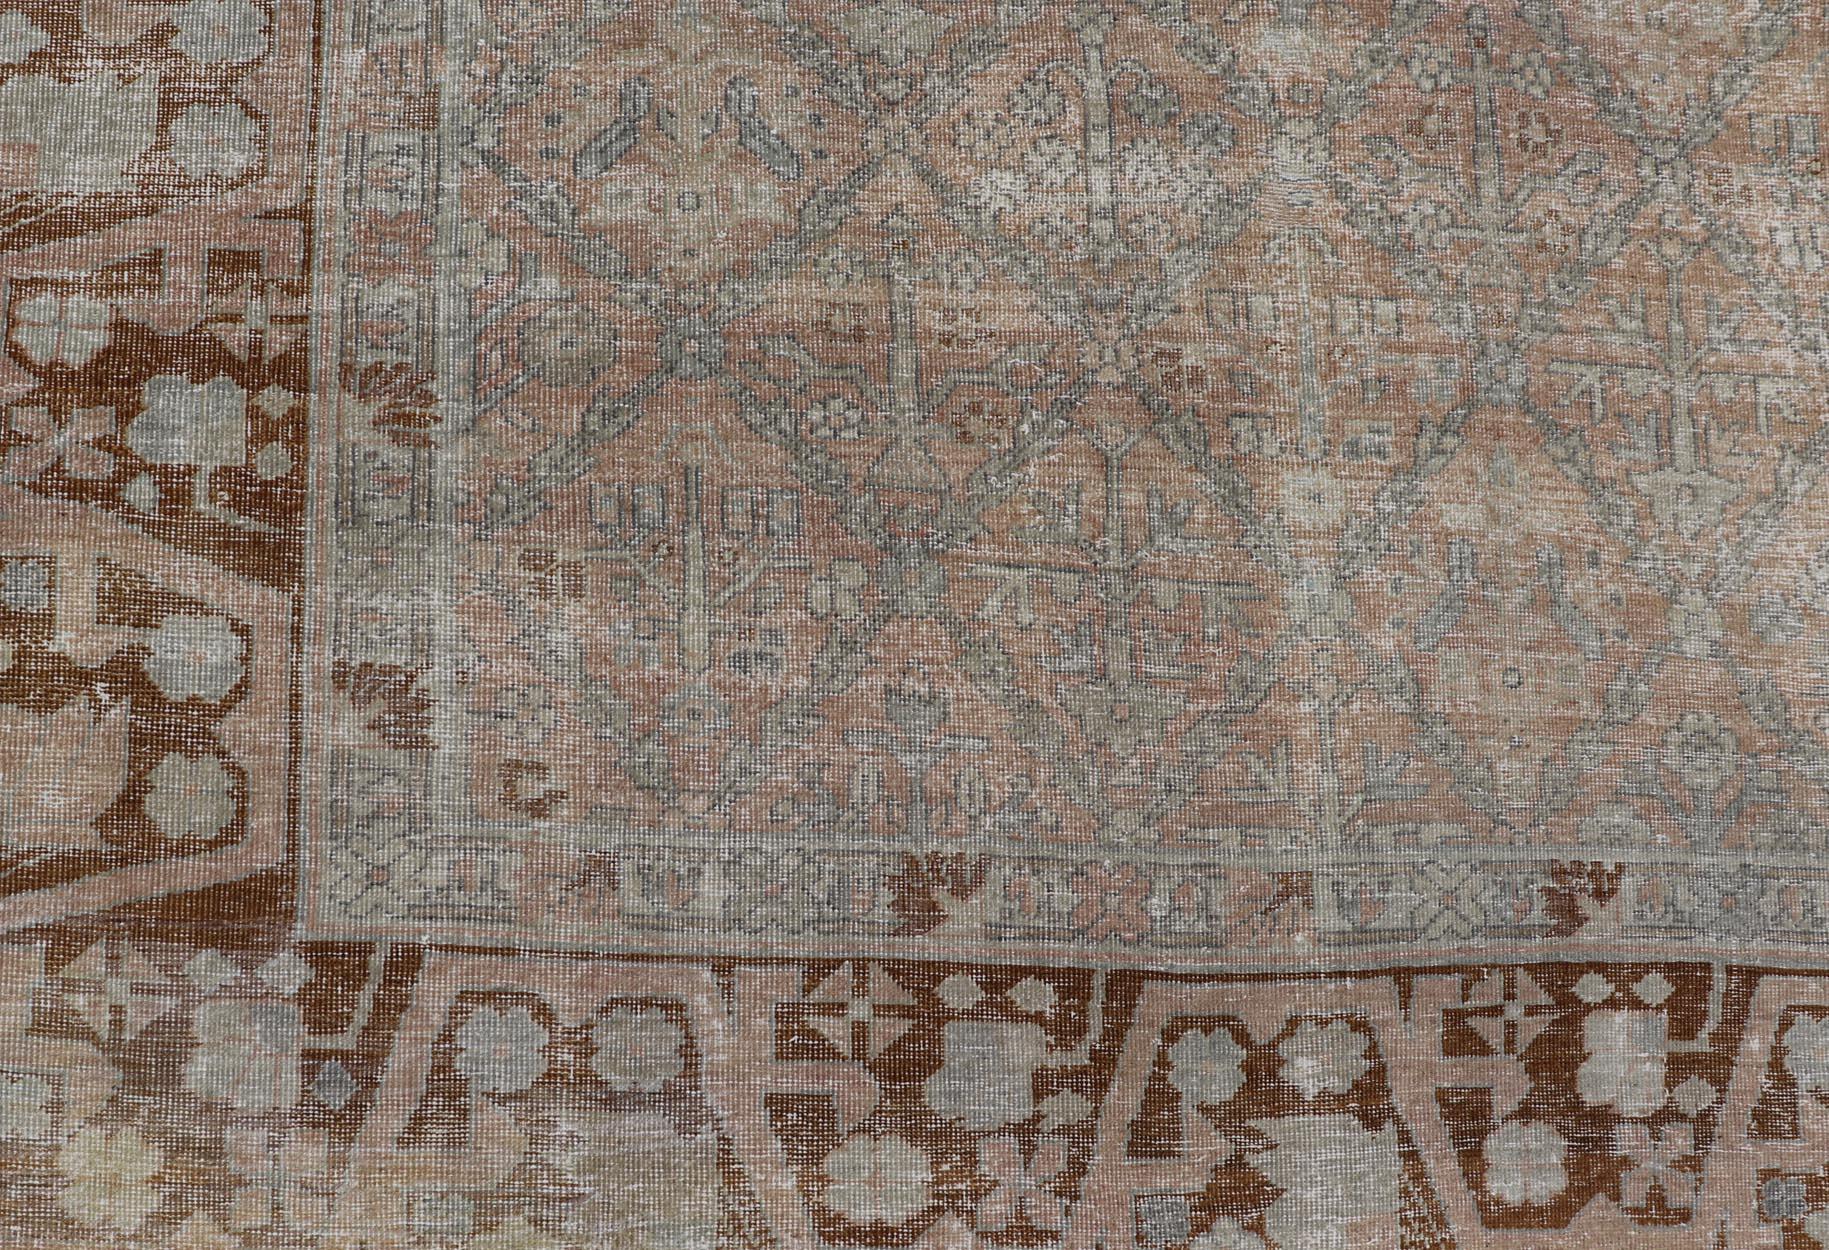 Antique Indian Agra Rug with All-Over Floral Design in Light Green and Brown In Good Condition For Sale In Atlanta, GA